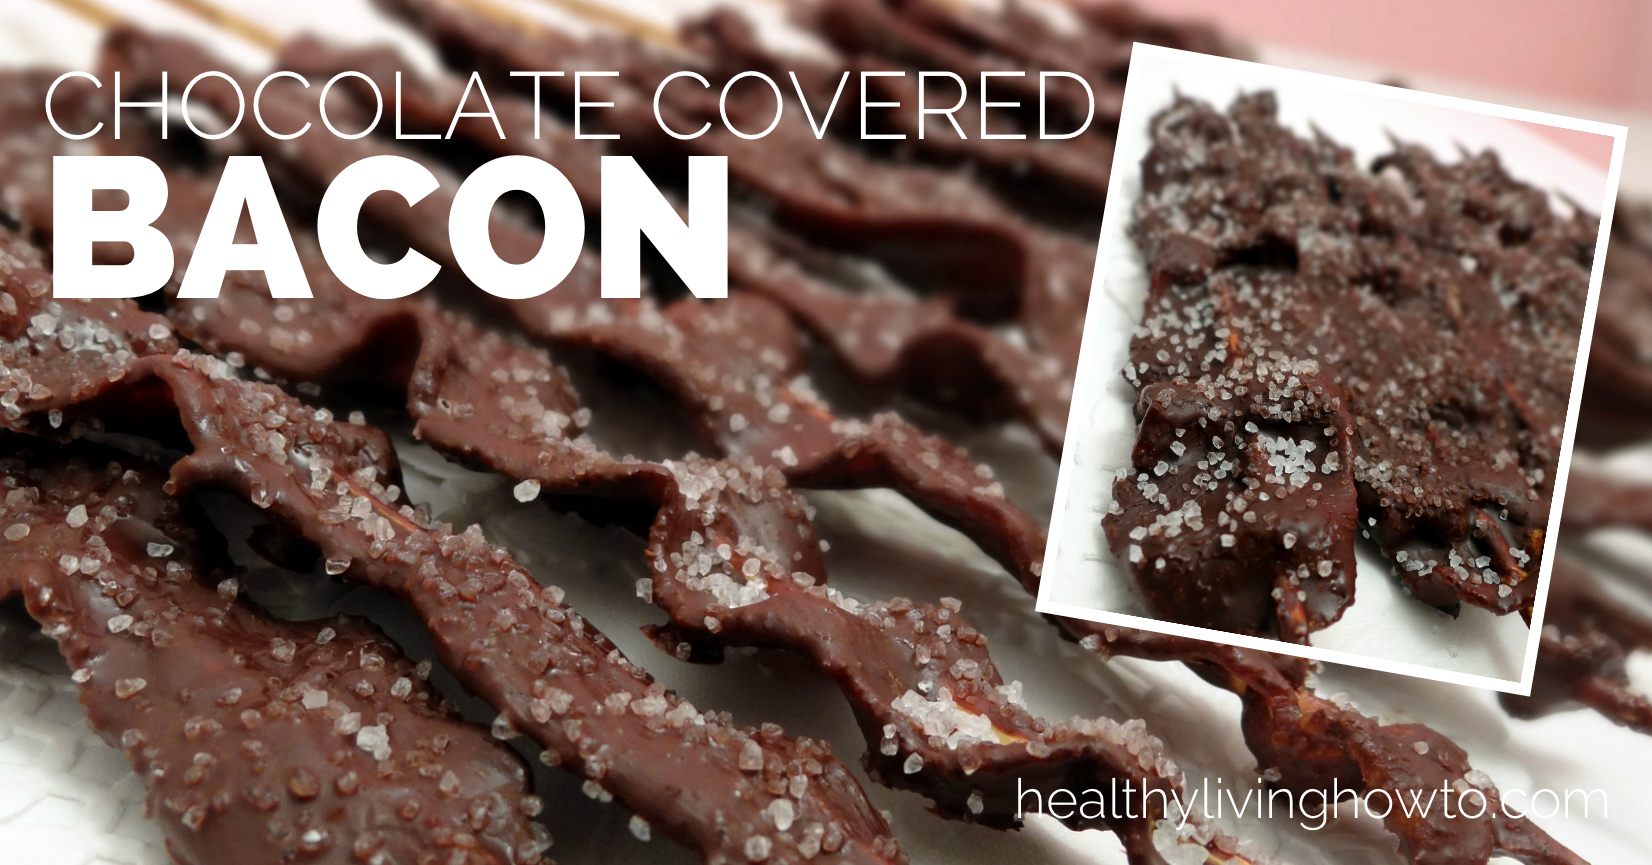 Chocolate Covered Bacon | healthylivinghowto.com